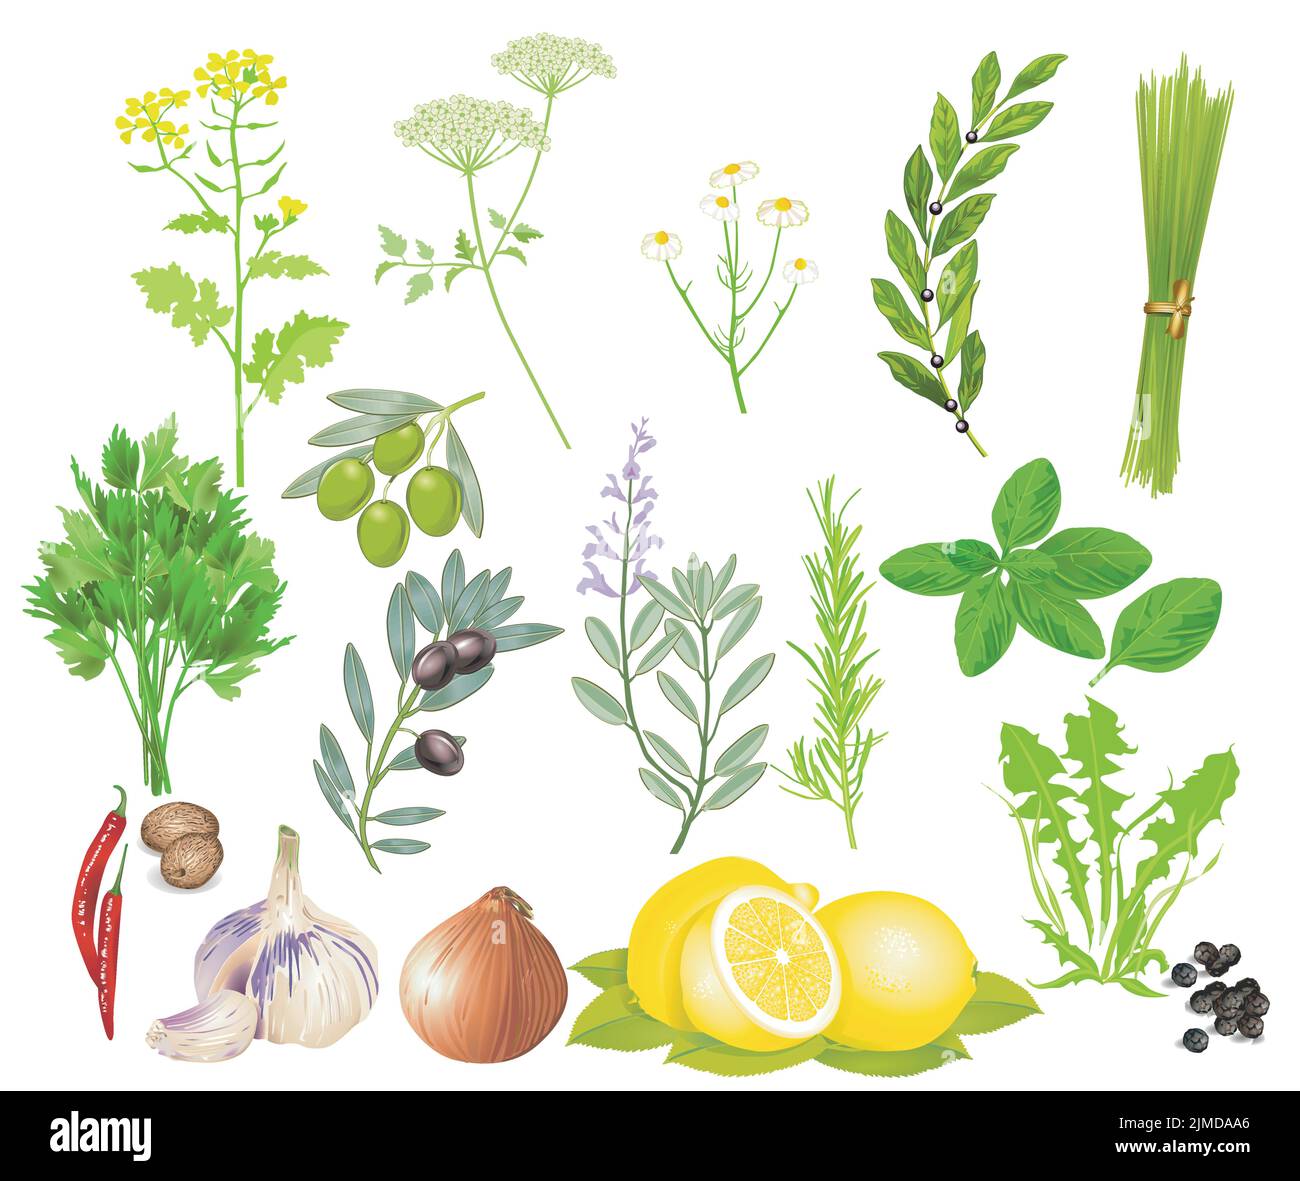 Herbs and spices isolated illustration Stock Vector